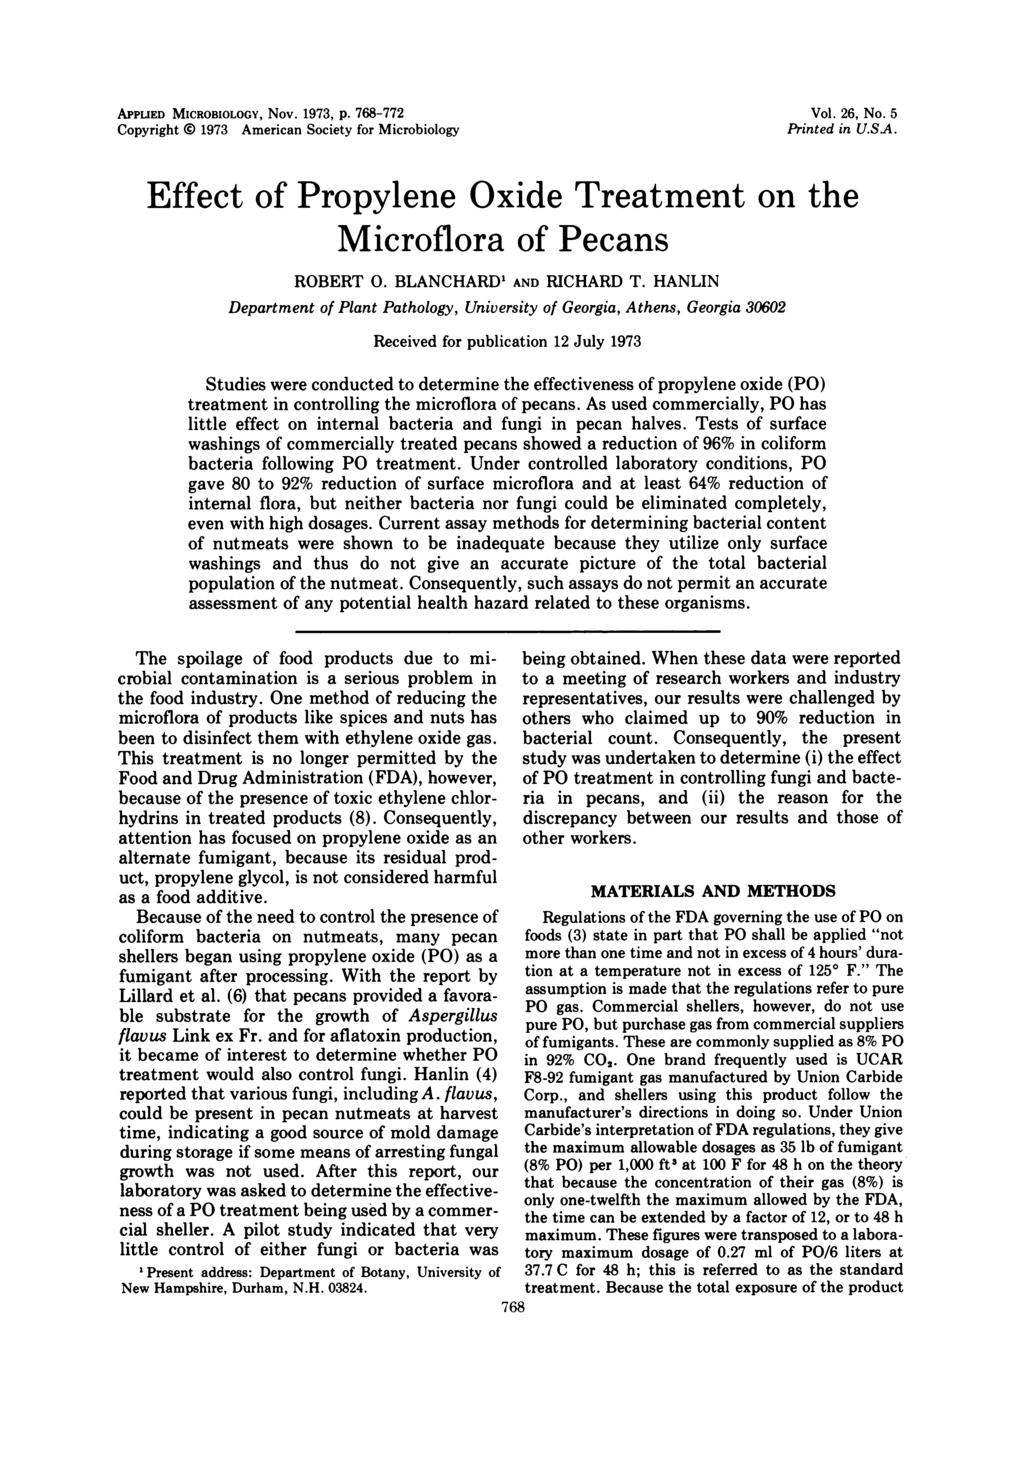 APPLIED MICROBIOLOGY, Nov. 1973, p. 768-772 Copyright 0 1973 American Society for Microbiology Vol. 26, No. 5 Printed in U.SA. Effect of Propylene Oxide Treatment on the Microflora of Pecans ROBERT 0.